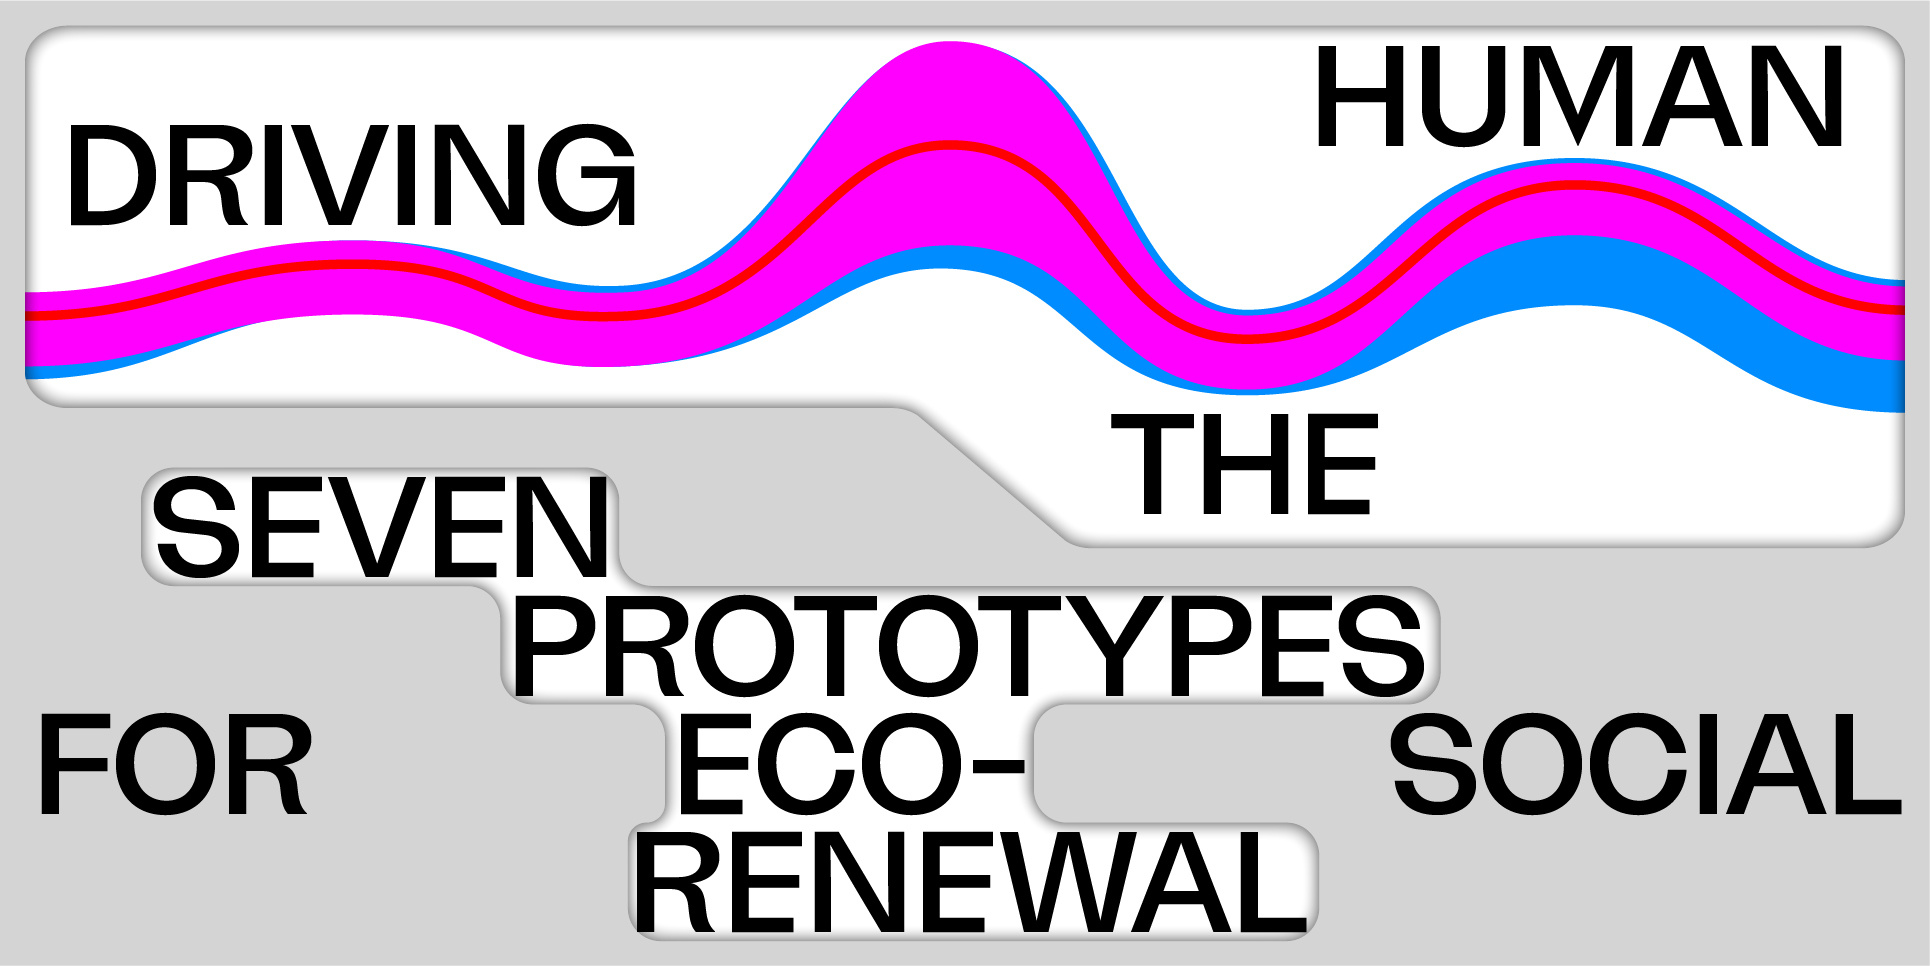 You can see a wave-like shape that runs through the middle of the picture. Driving the Human" is written above the wave. In the lower part of the picture there are some words: seven prototypes often eco-social renewal. 